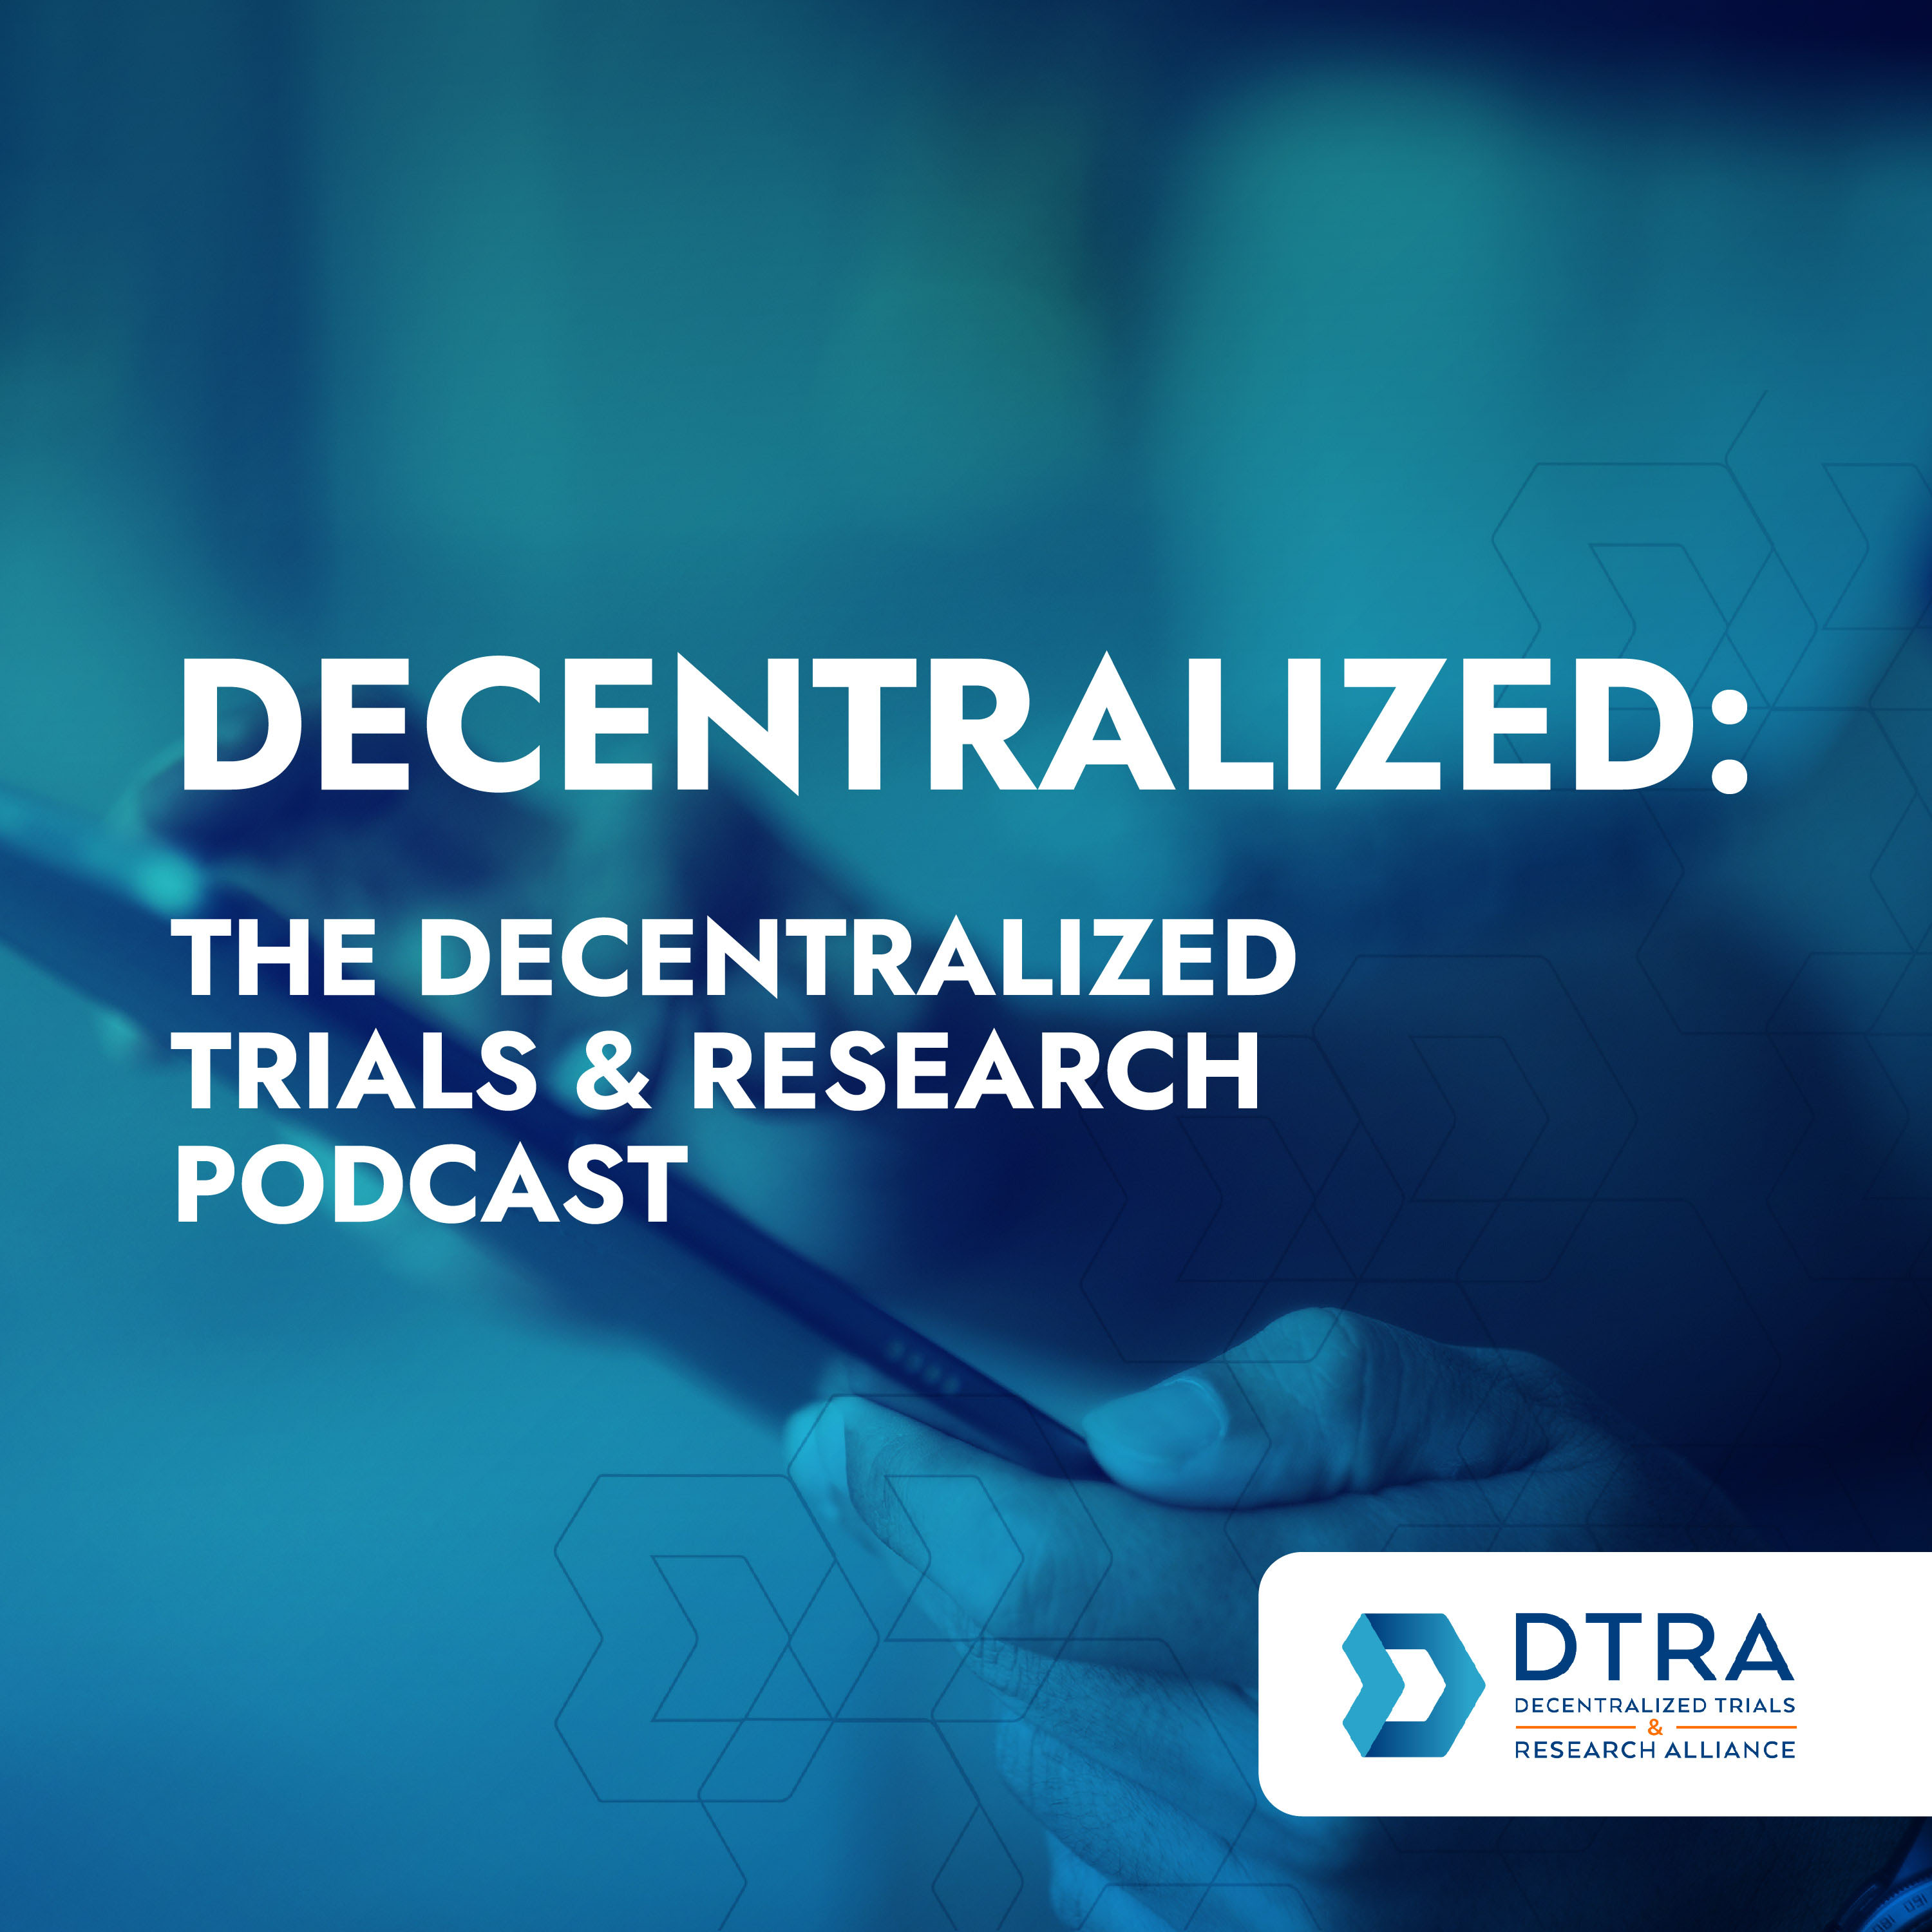 What is the Financial ROI for Decentralized Trials?